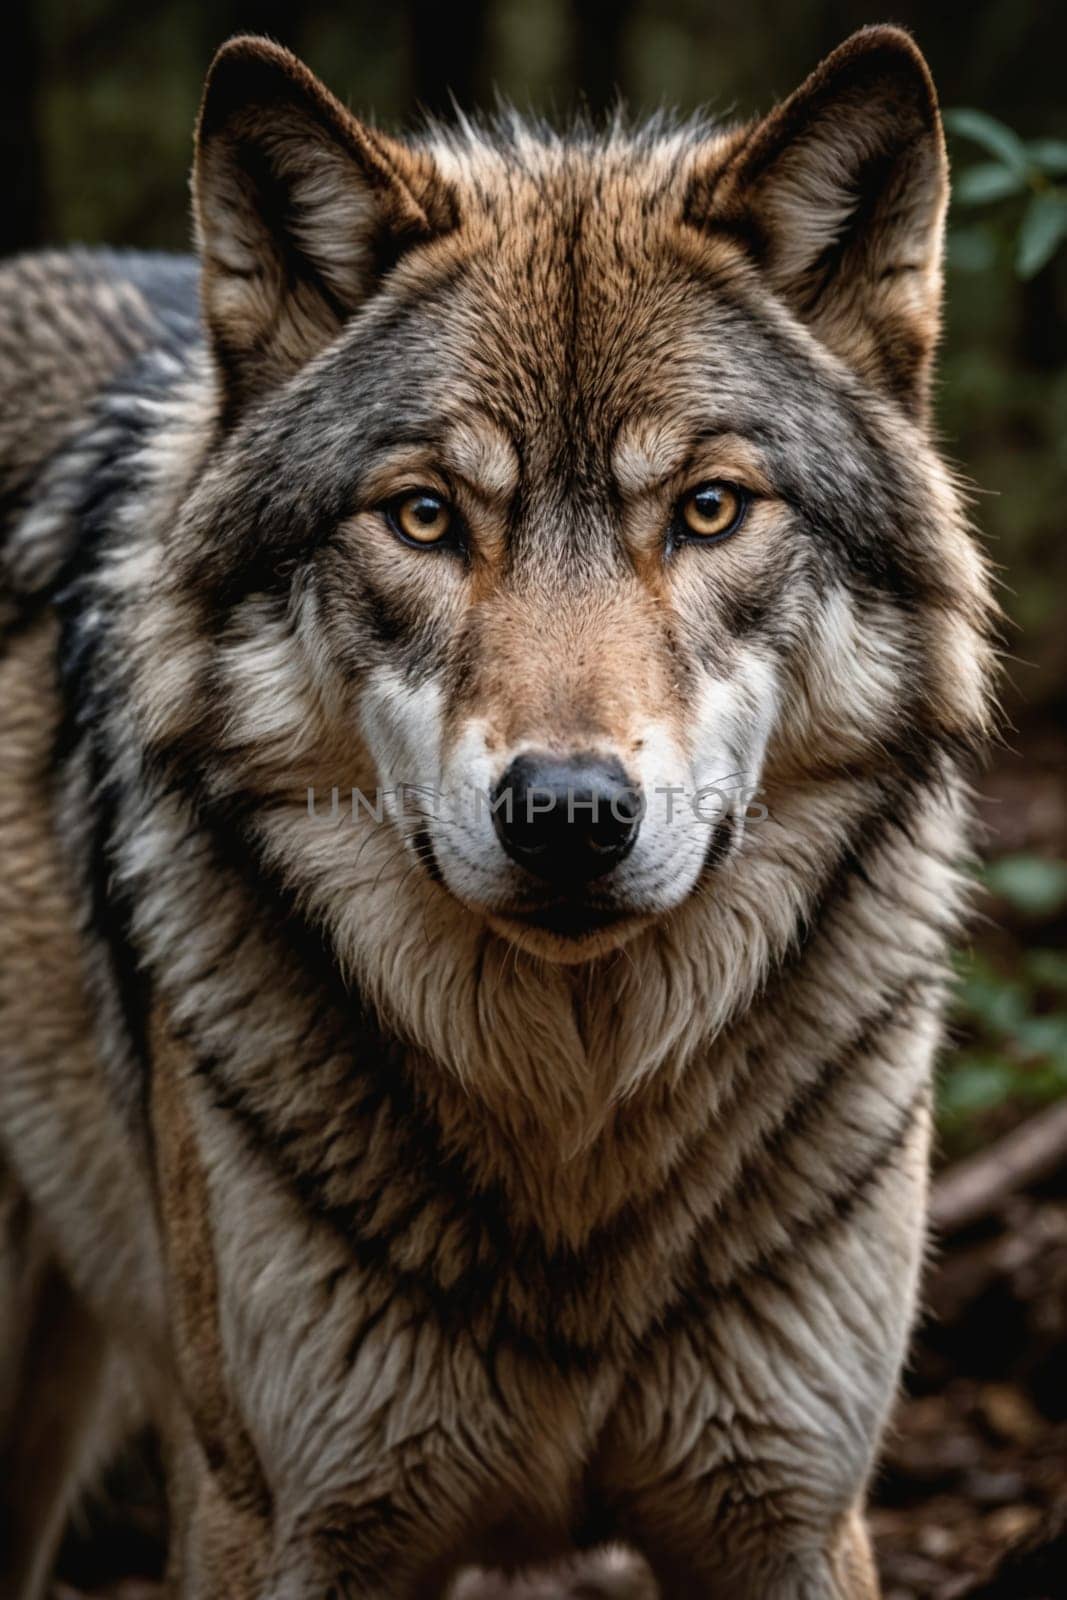 Capturing a moment of connection, a wild wolf stares directly at the lens, exuding a powerful presence.